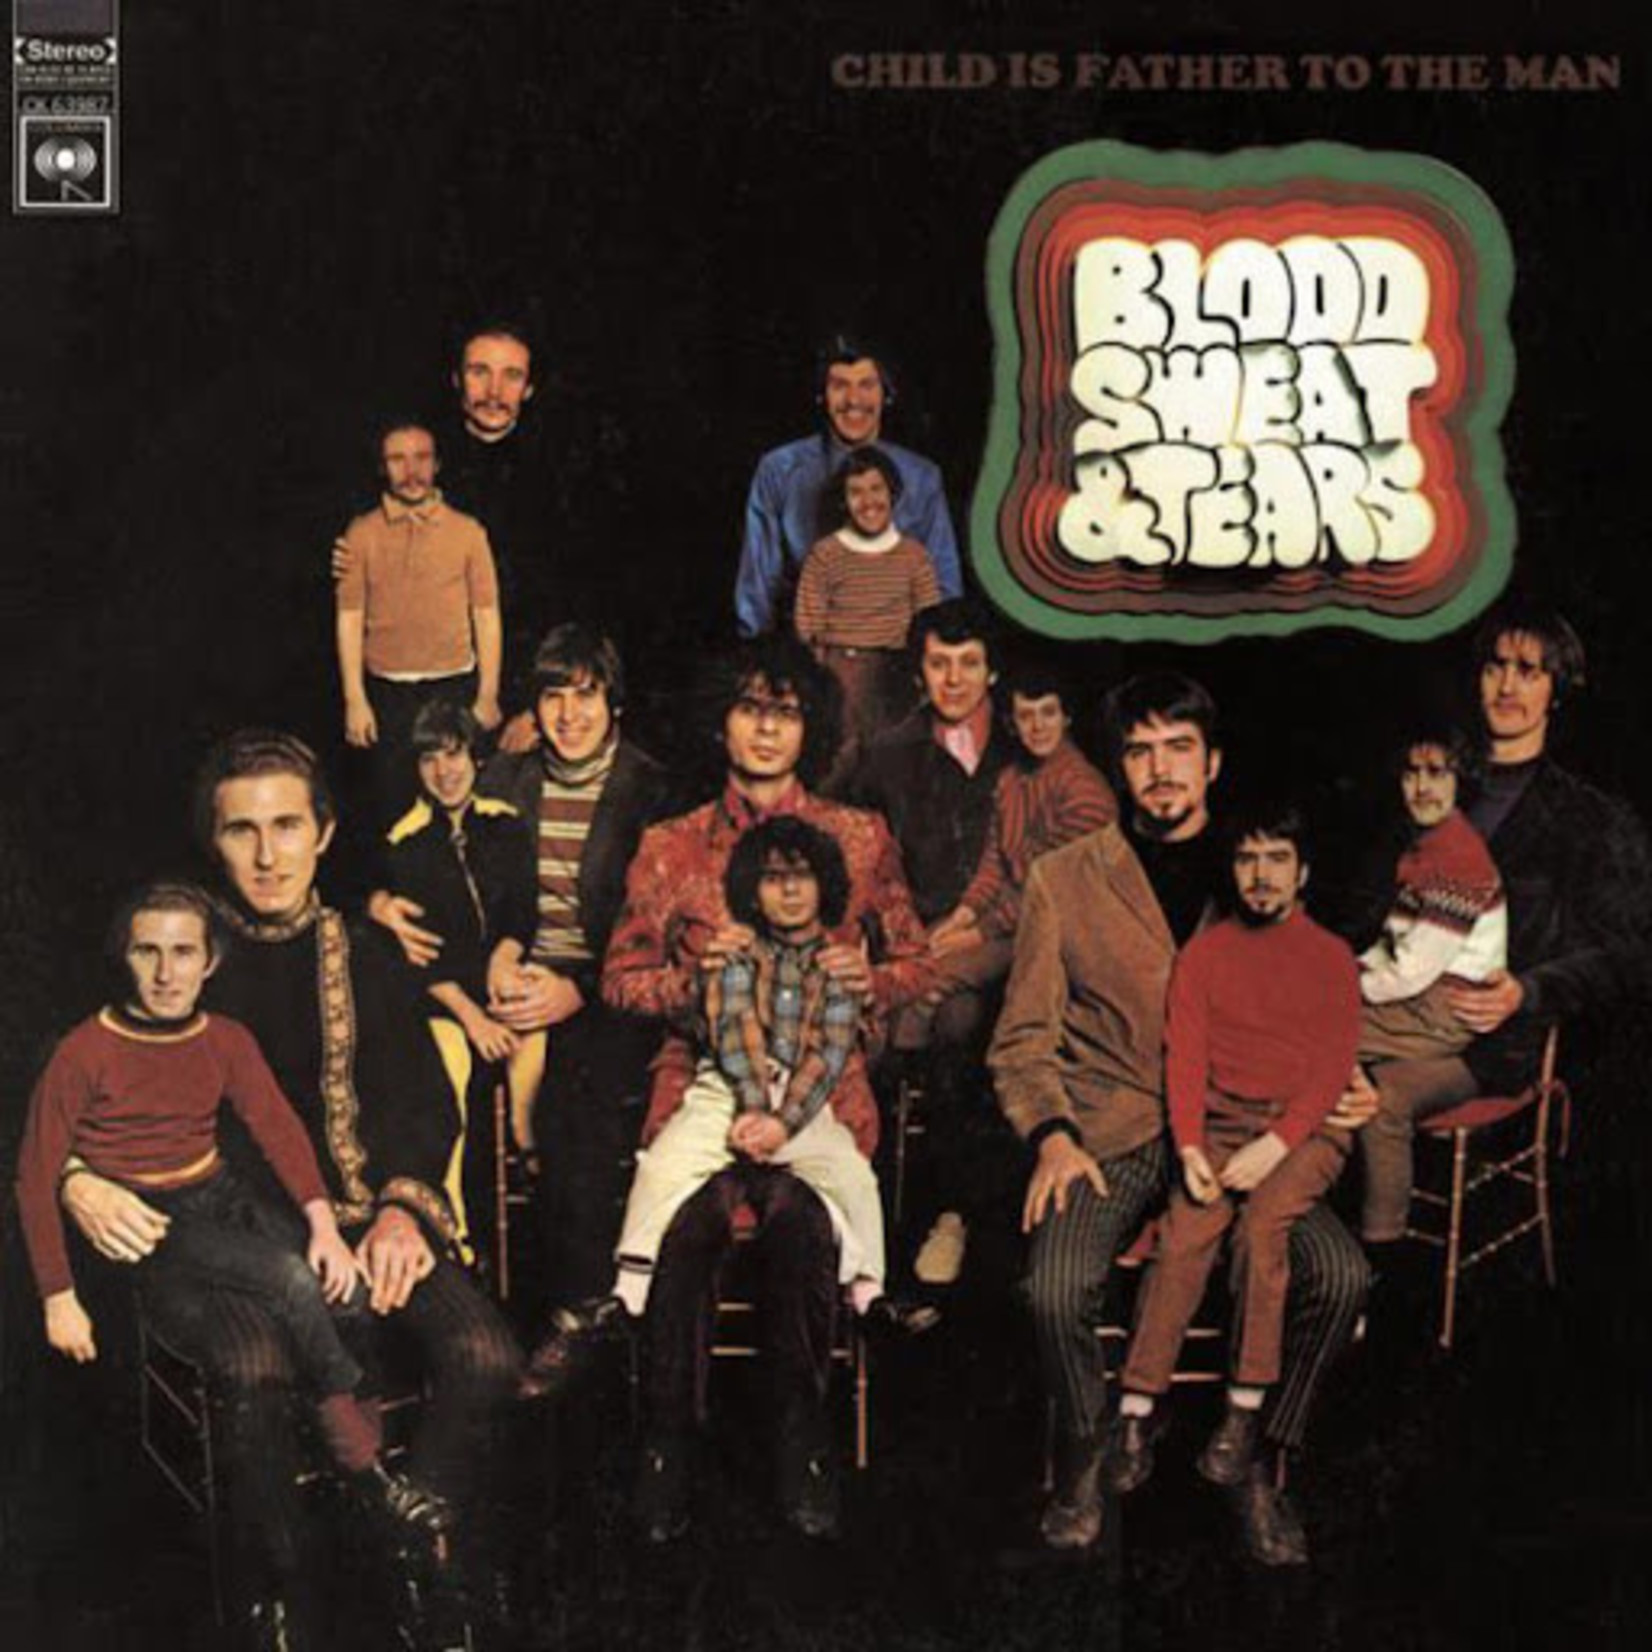 [New] Sweat & Tears Blood - Child Is Father To The Man